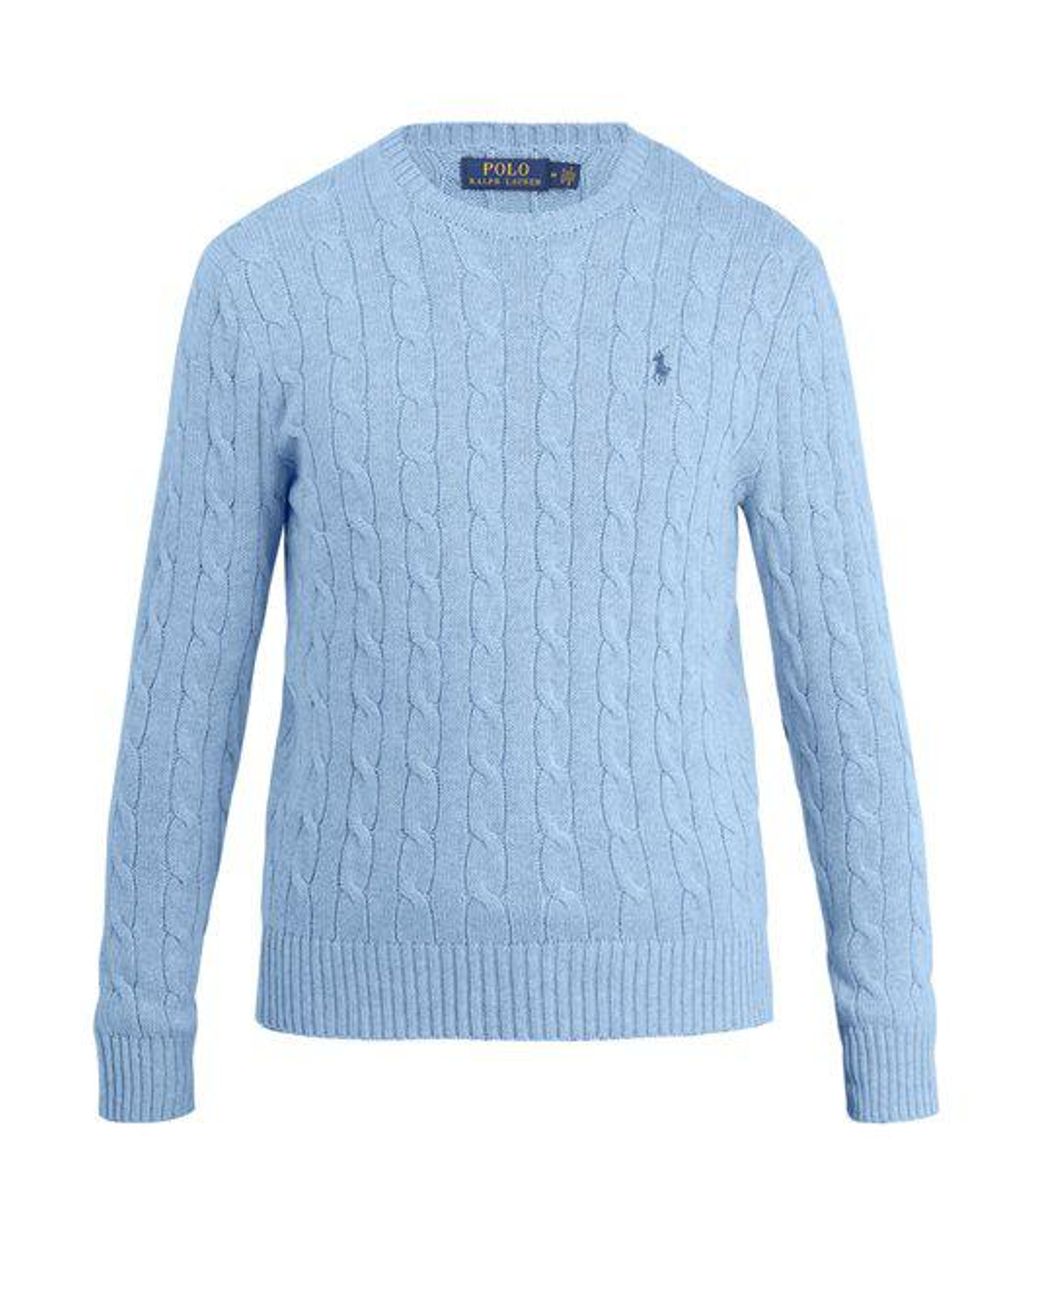 Polo Ralph Lauren Crew-neck Cable-knit Cotton Sweater in Blue for Men | Lyst